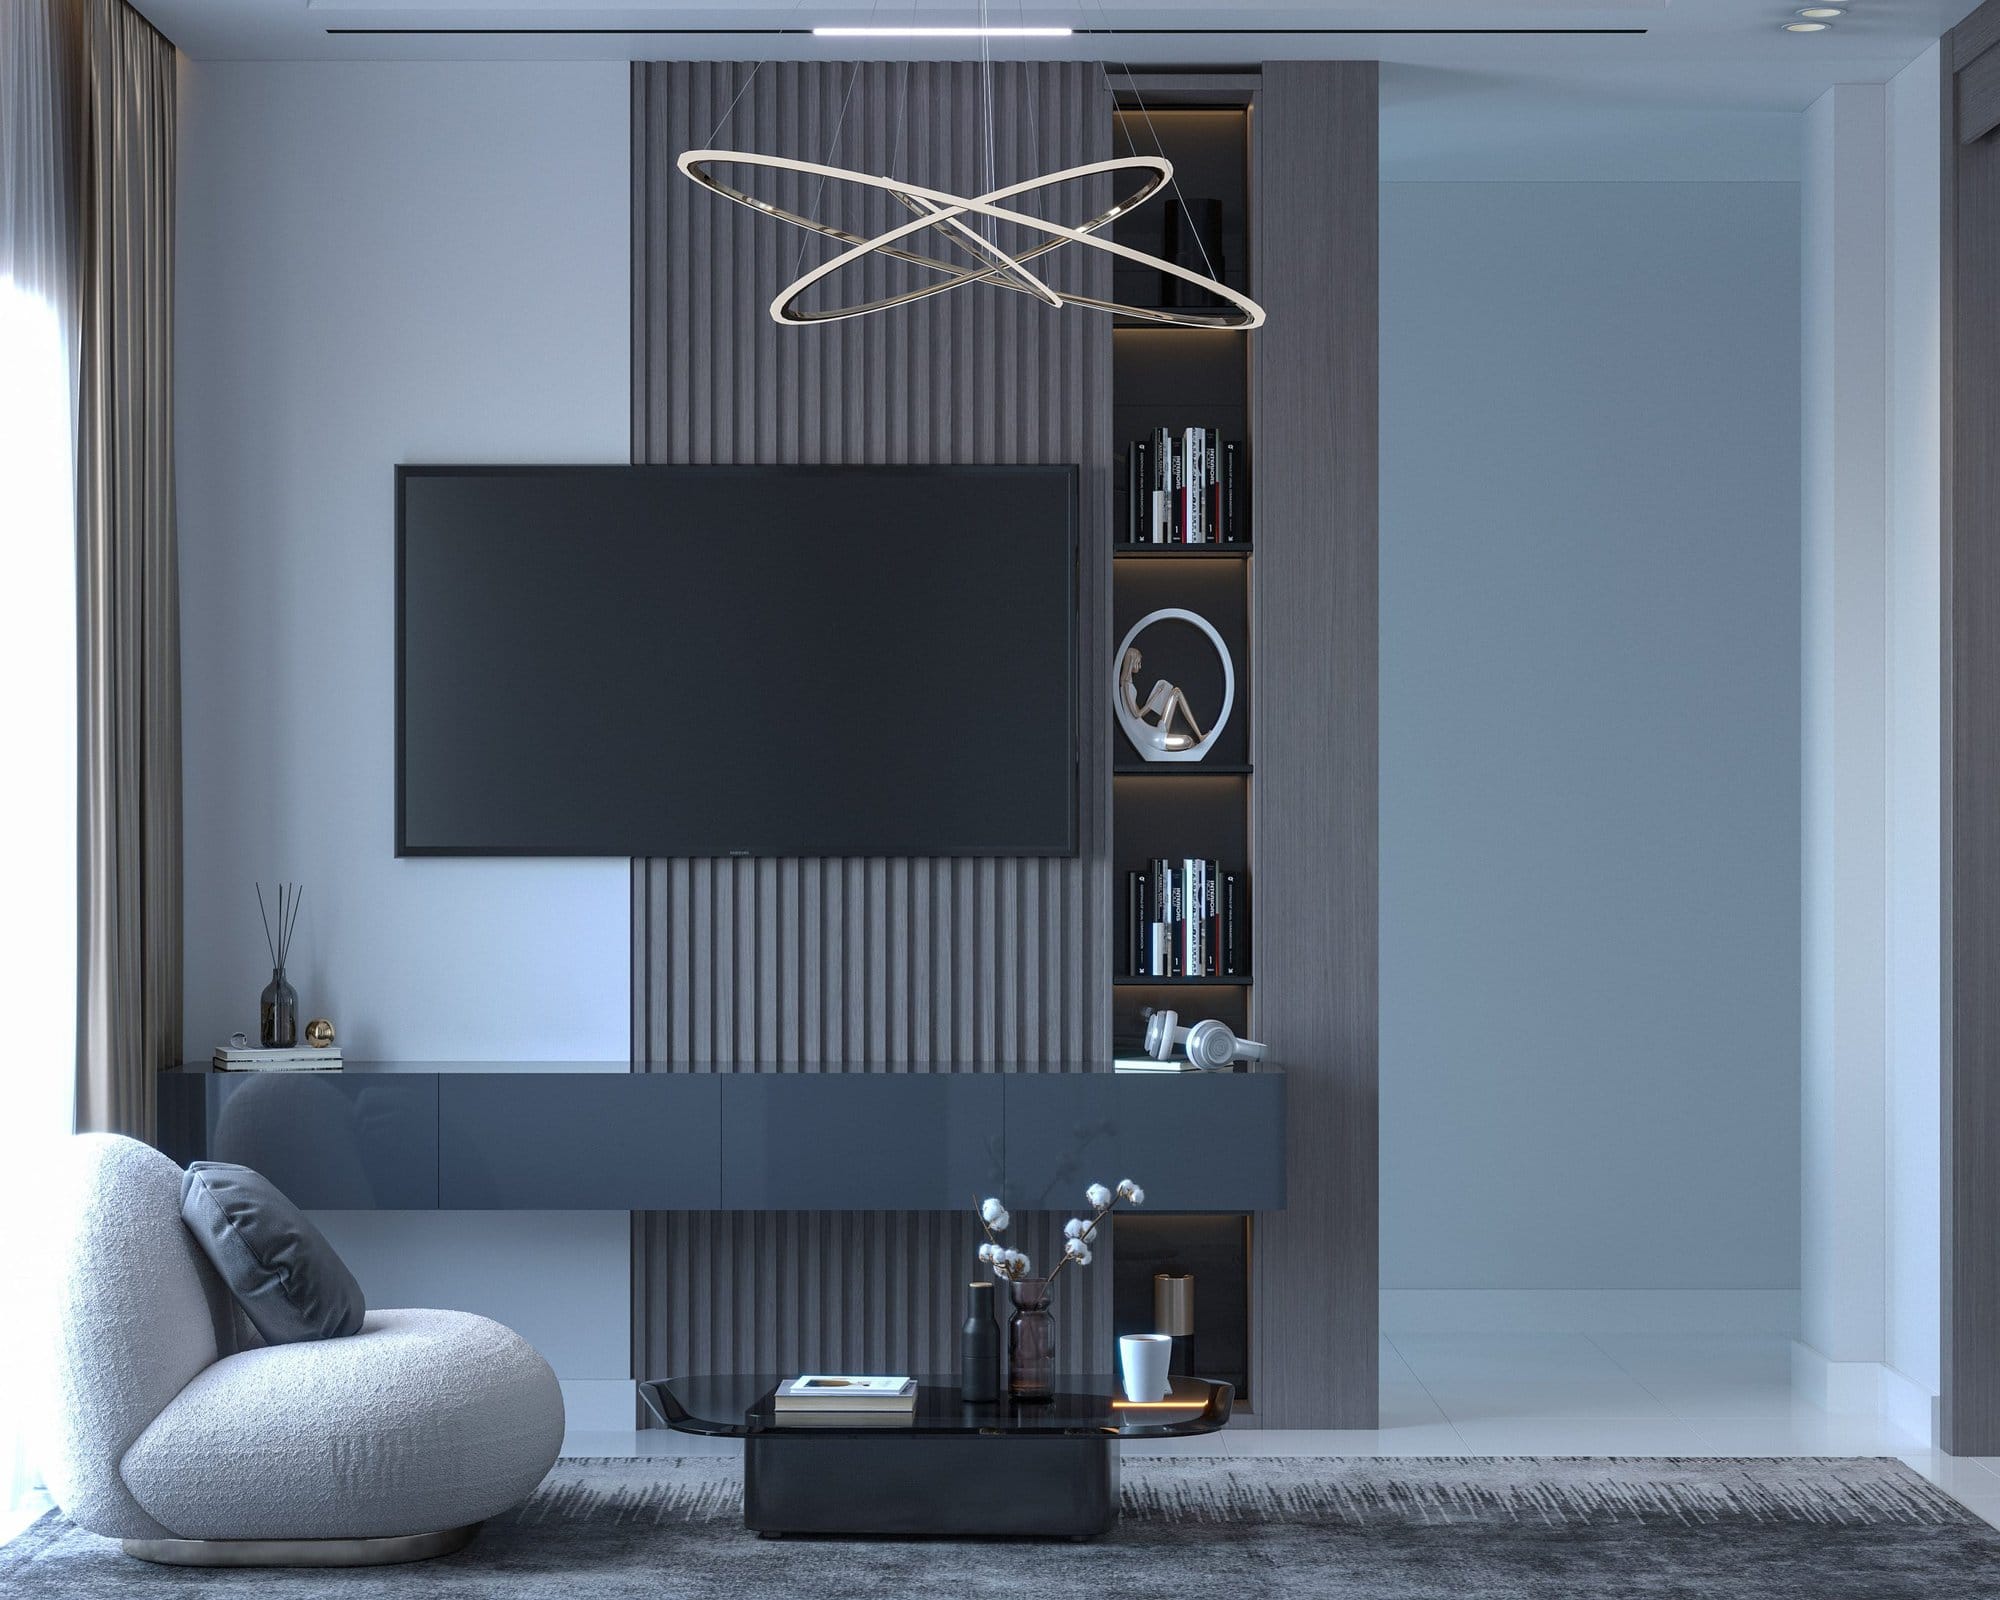  Blue and Gray TV Feature scaled